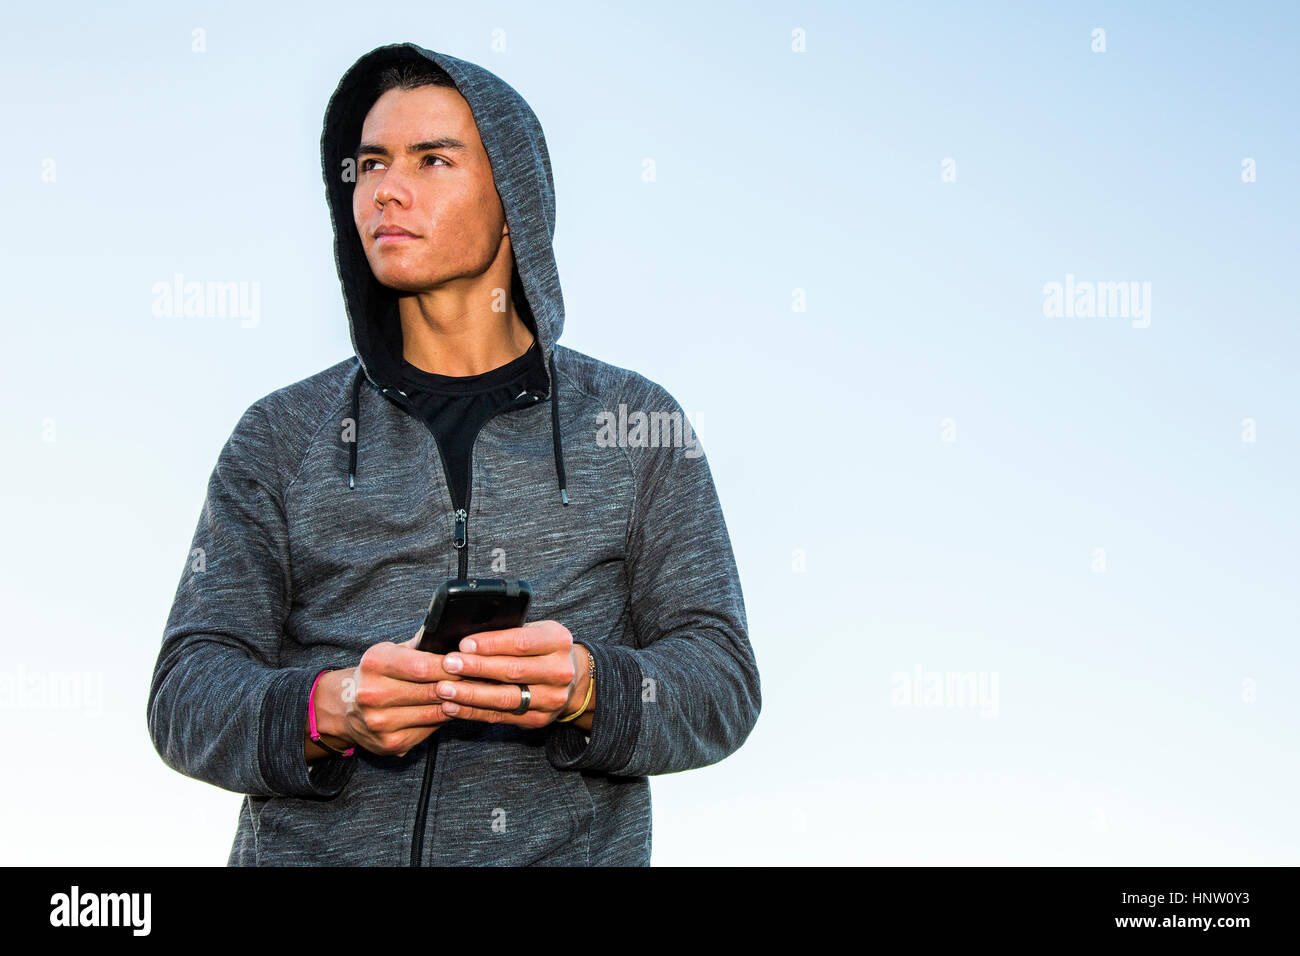 Mixed Race man wearing hoody texting on cell phone Stock Photo